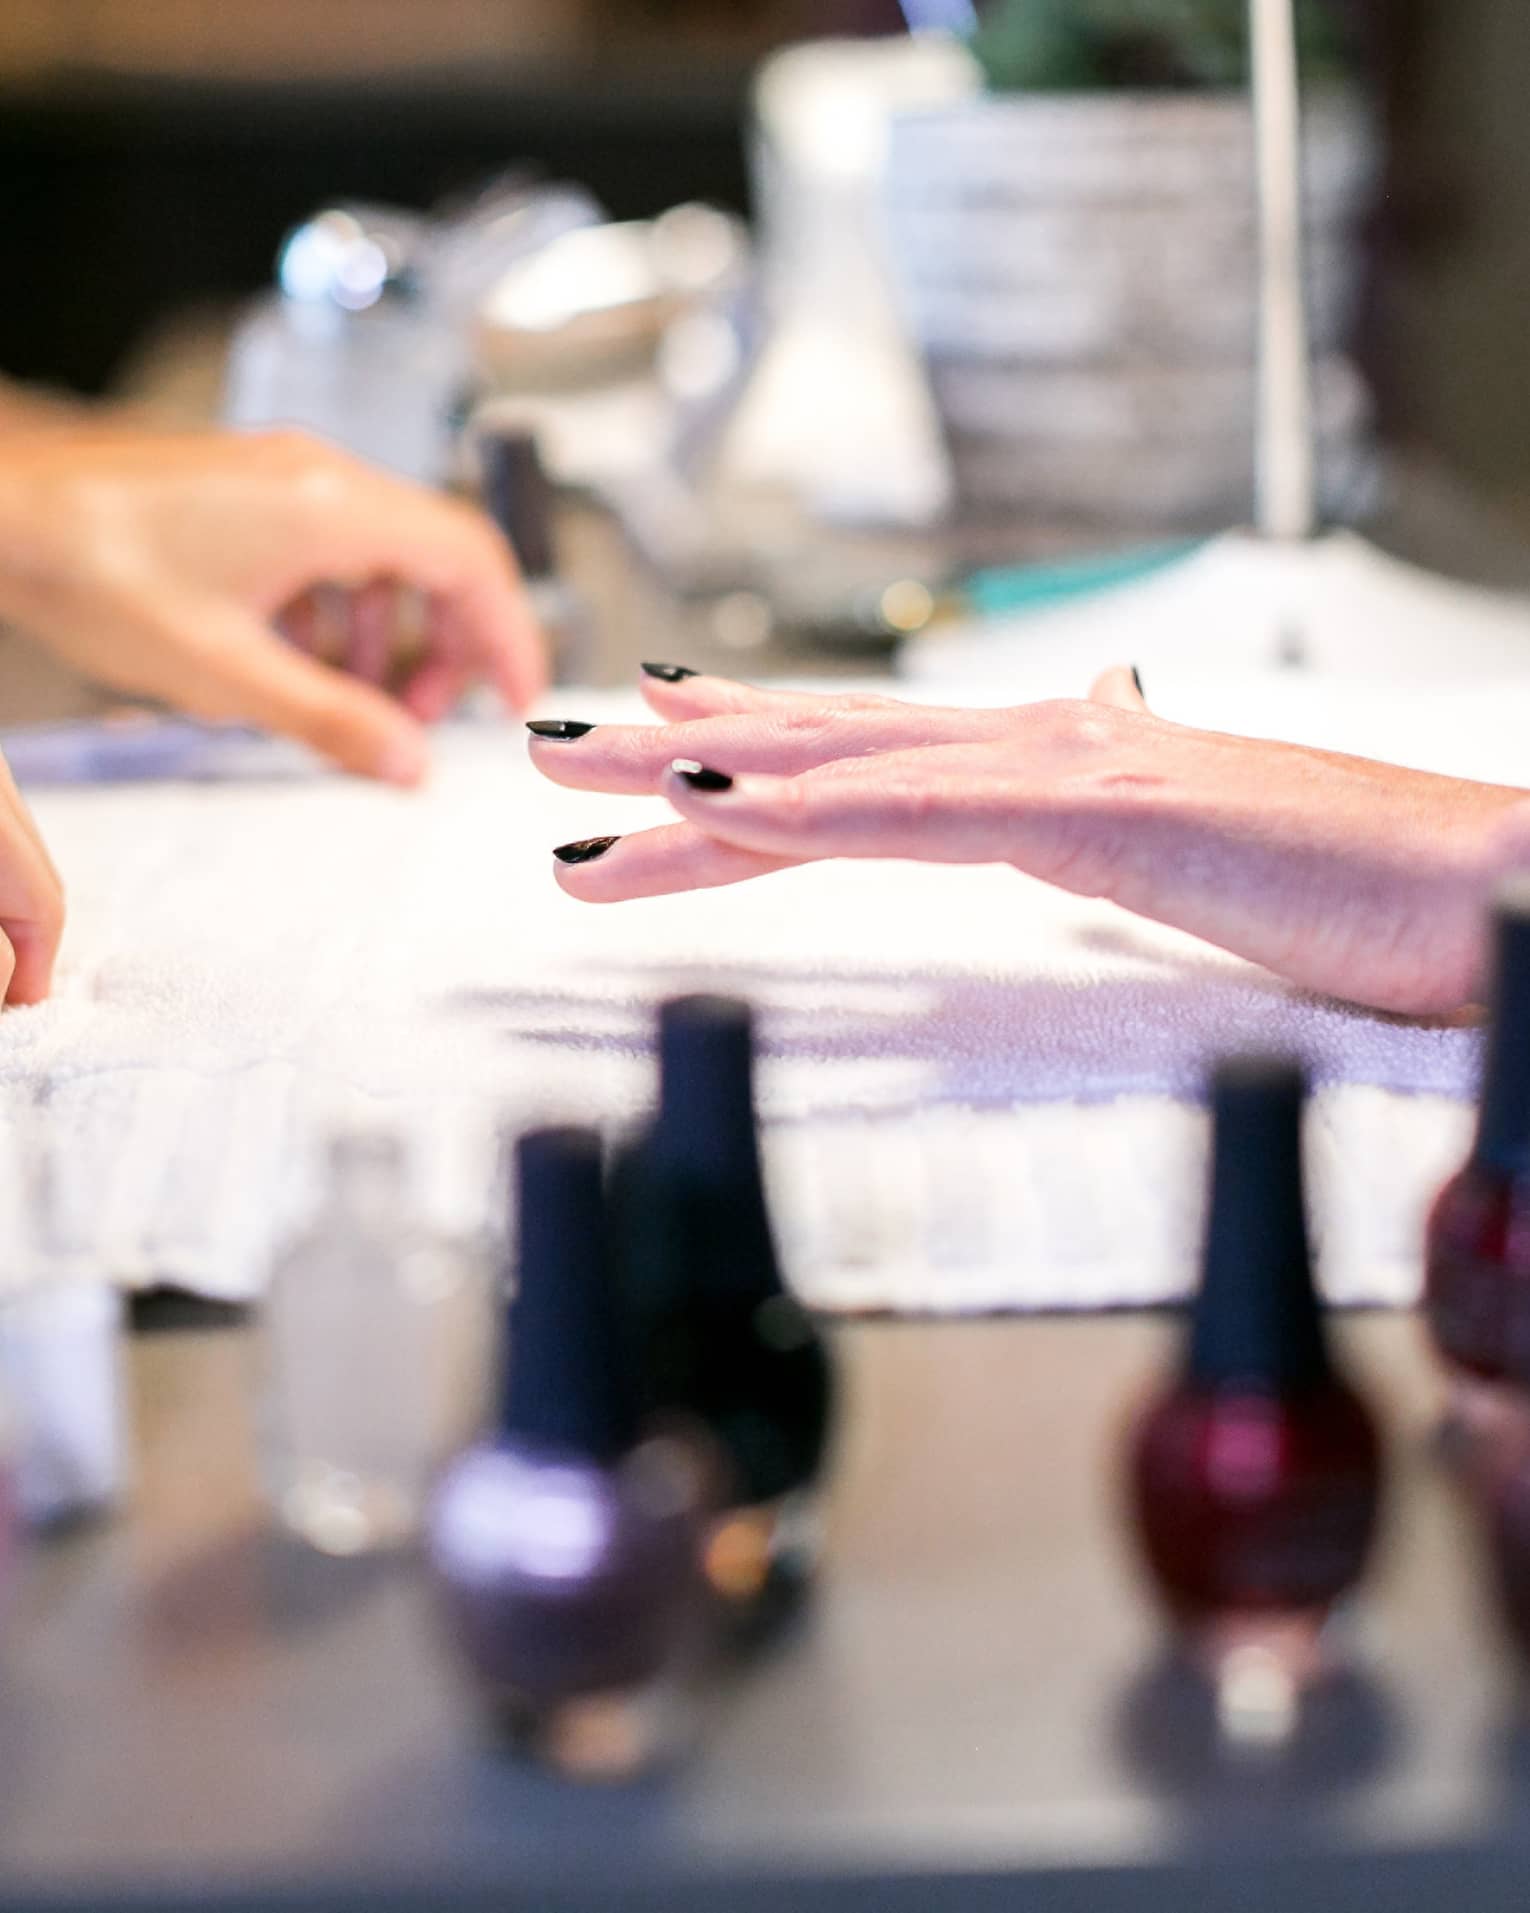 Close-up of woman's freshly-painted nails in dark colour above white cloth, nail polish bottles in foreground